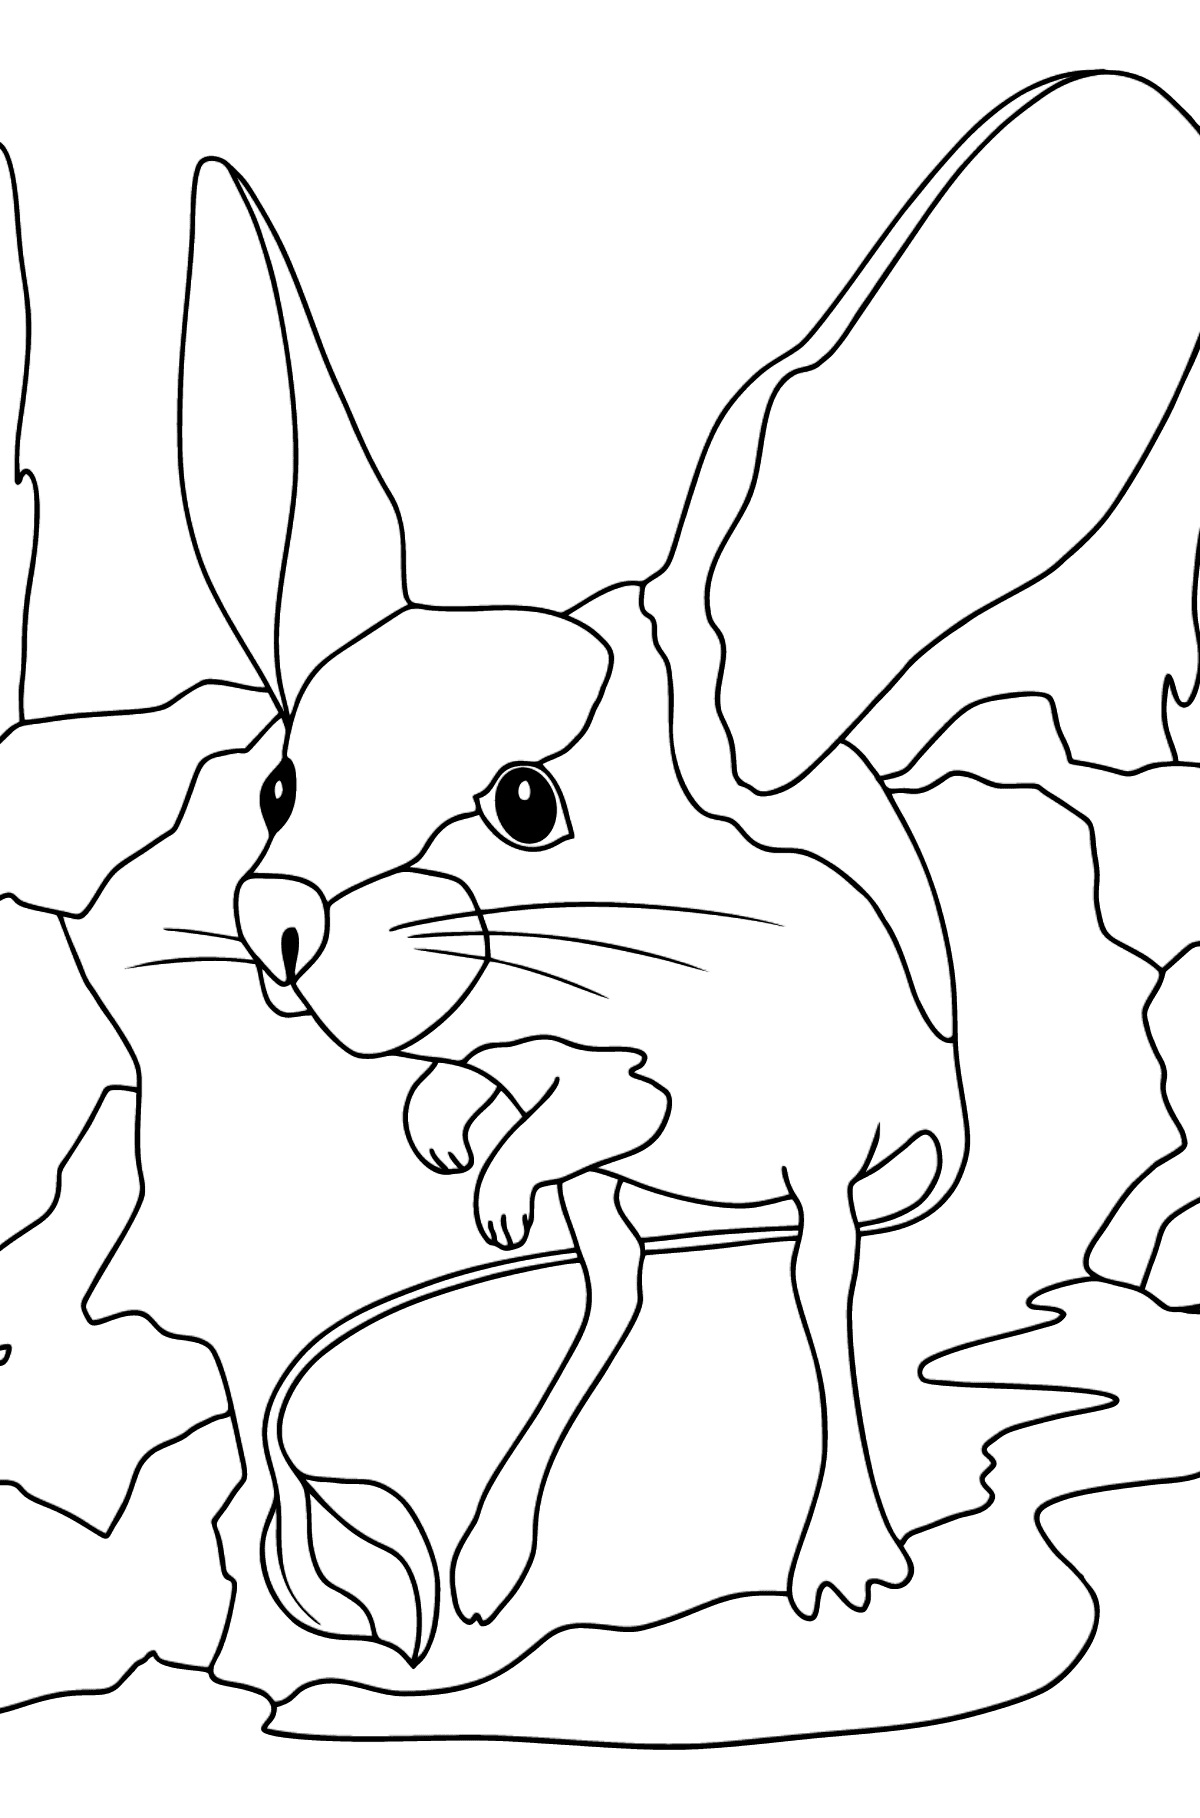 A Jerboa is Inspecting the Area Coloring Page - Coloring Pages for Kids